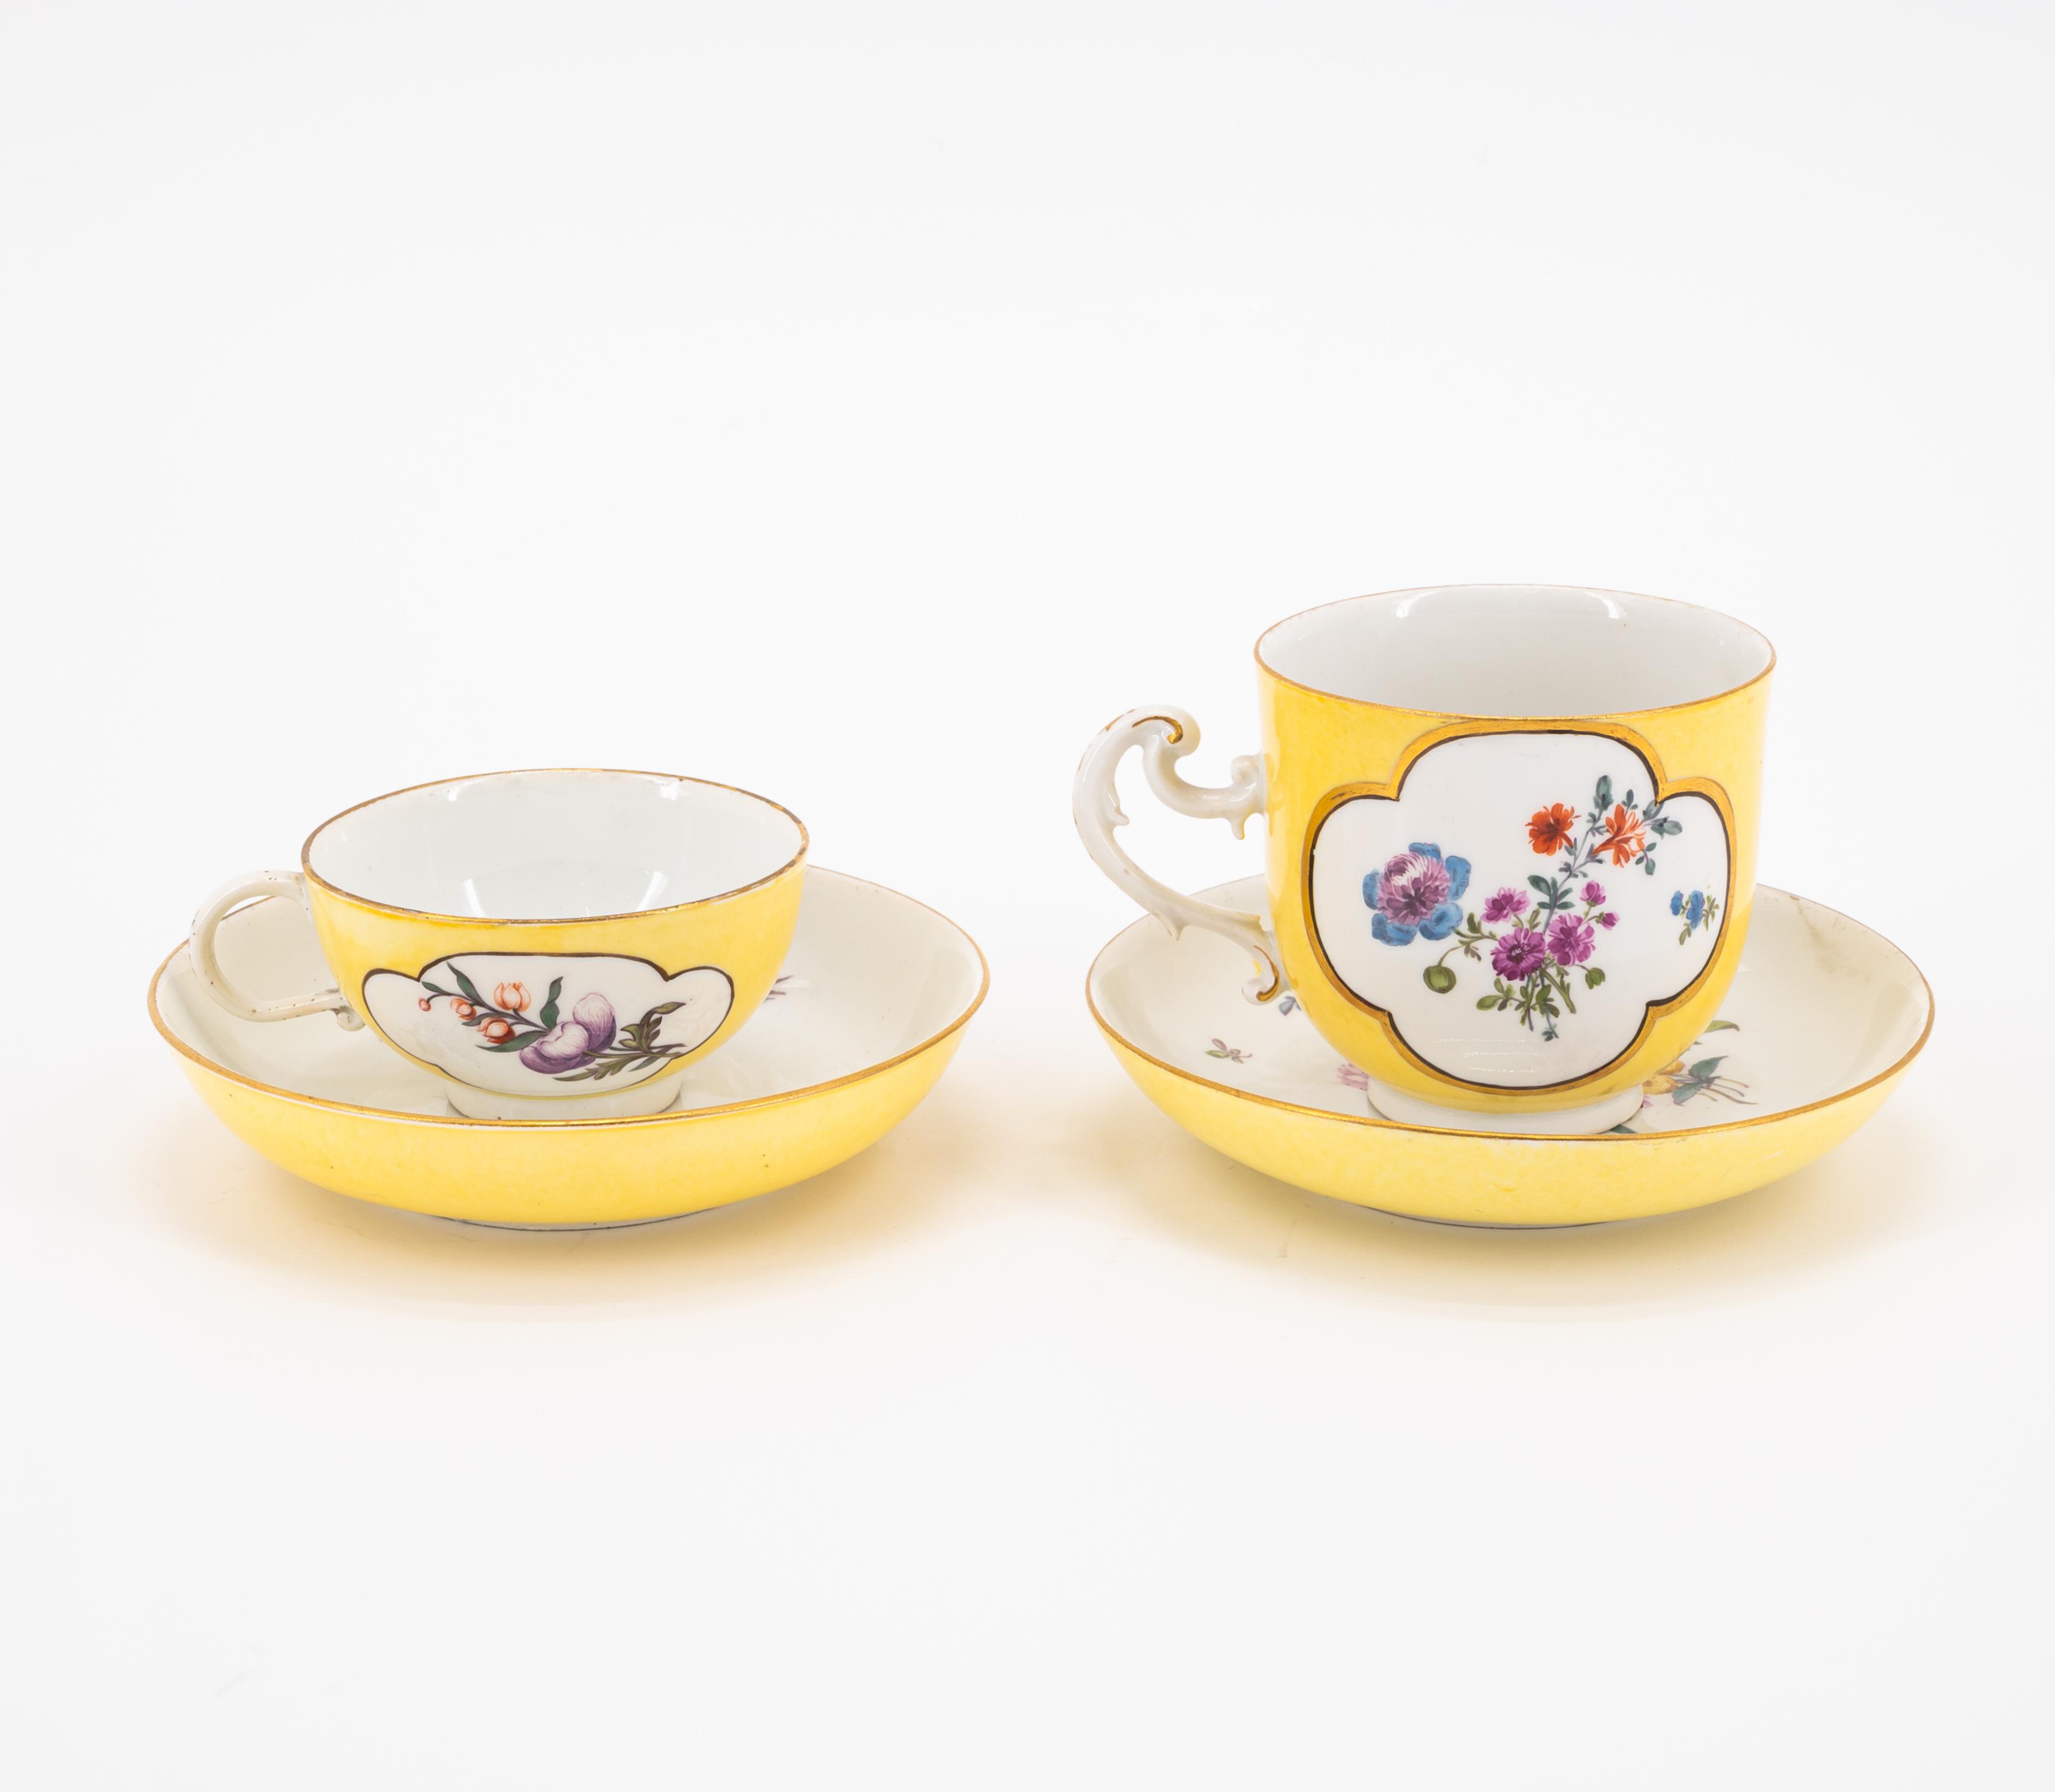 PORCELAIN TEA POT, TWO CUPS AND SAUCERS WITH YELLOW GROUND AND OMBRÉ FLORAL PAINTING - Image 3 of 11